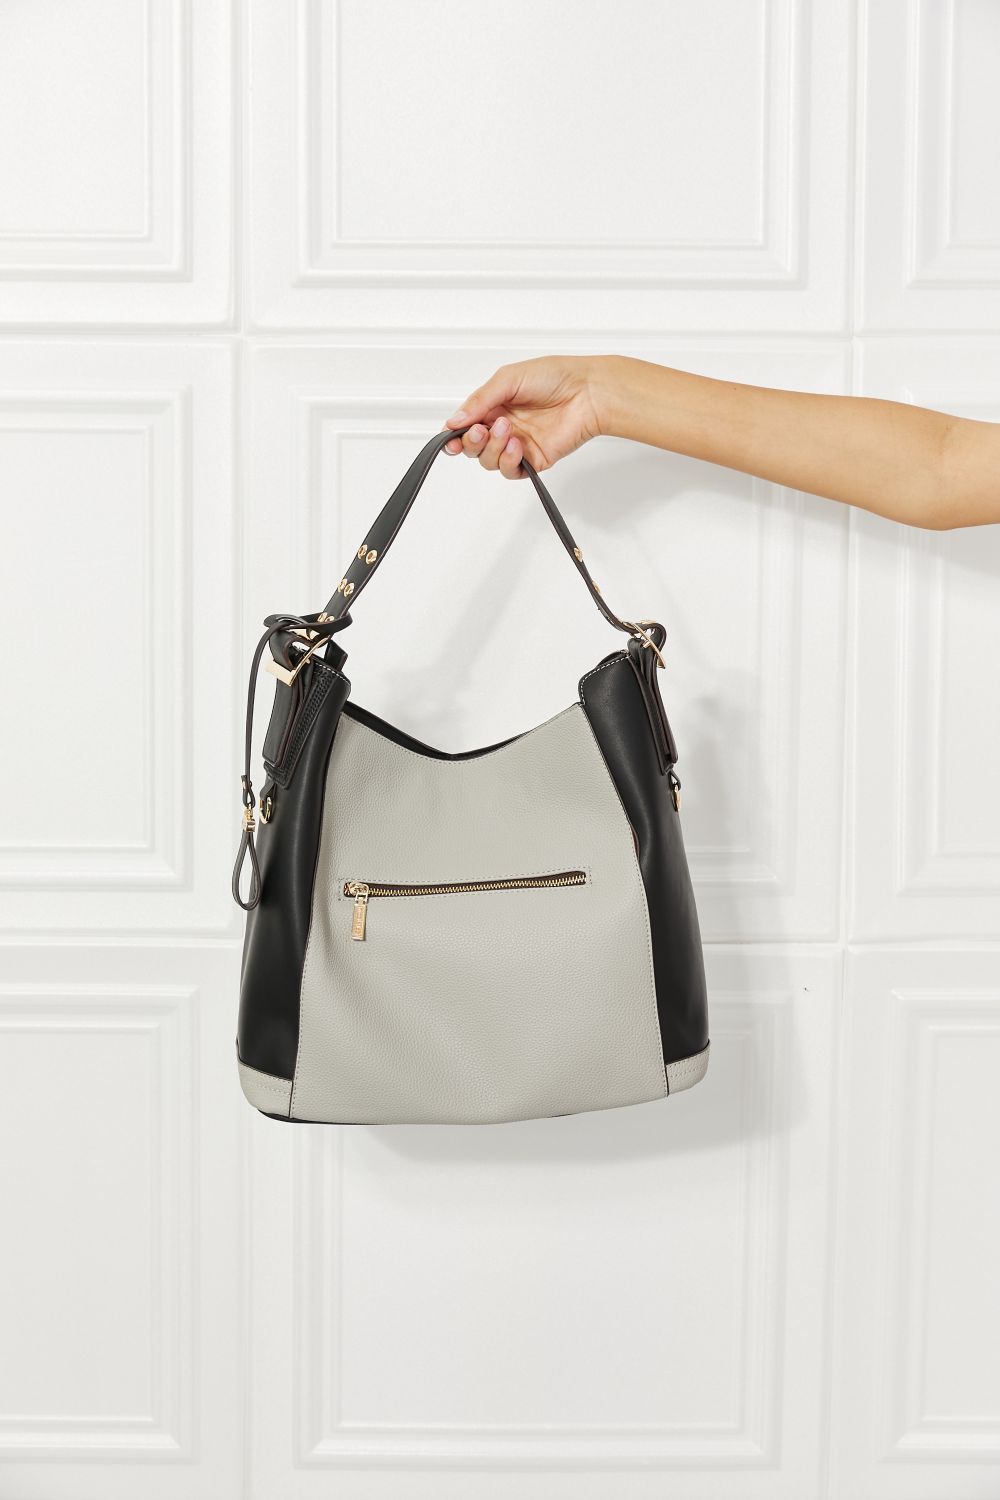 Make it Right Twon-toned Handbag in Gray  Southern Soul Collectives 